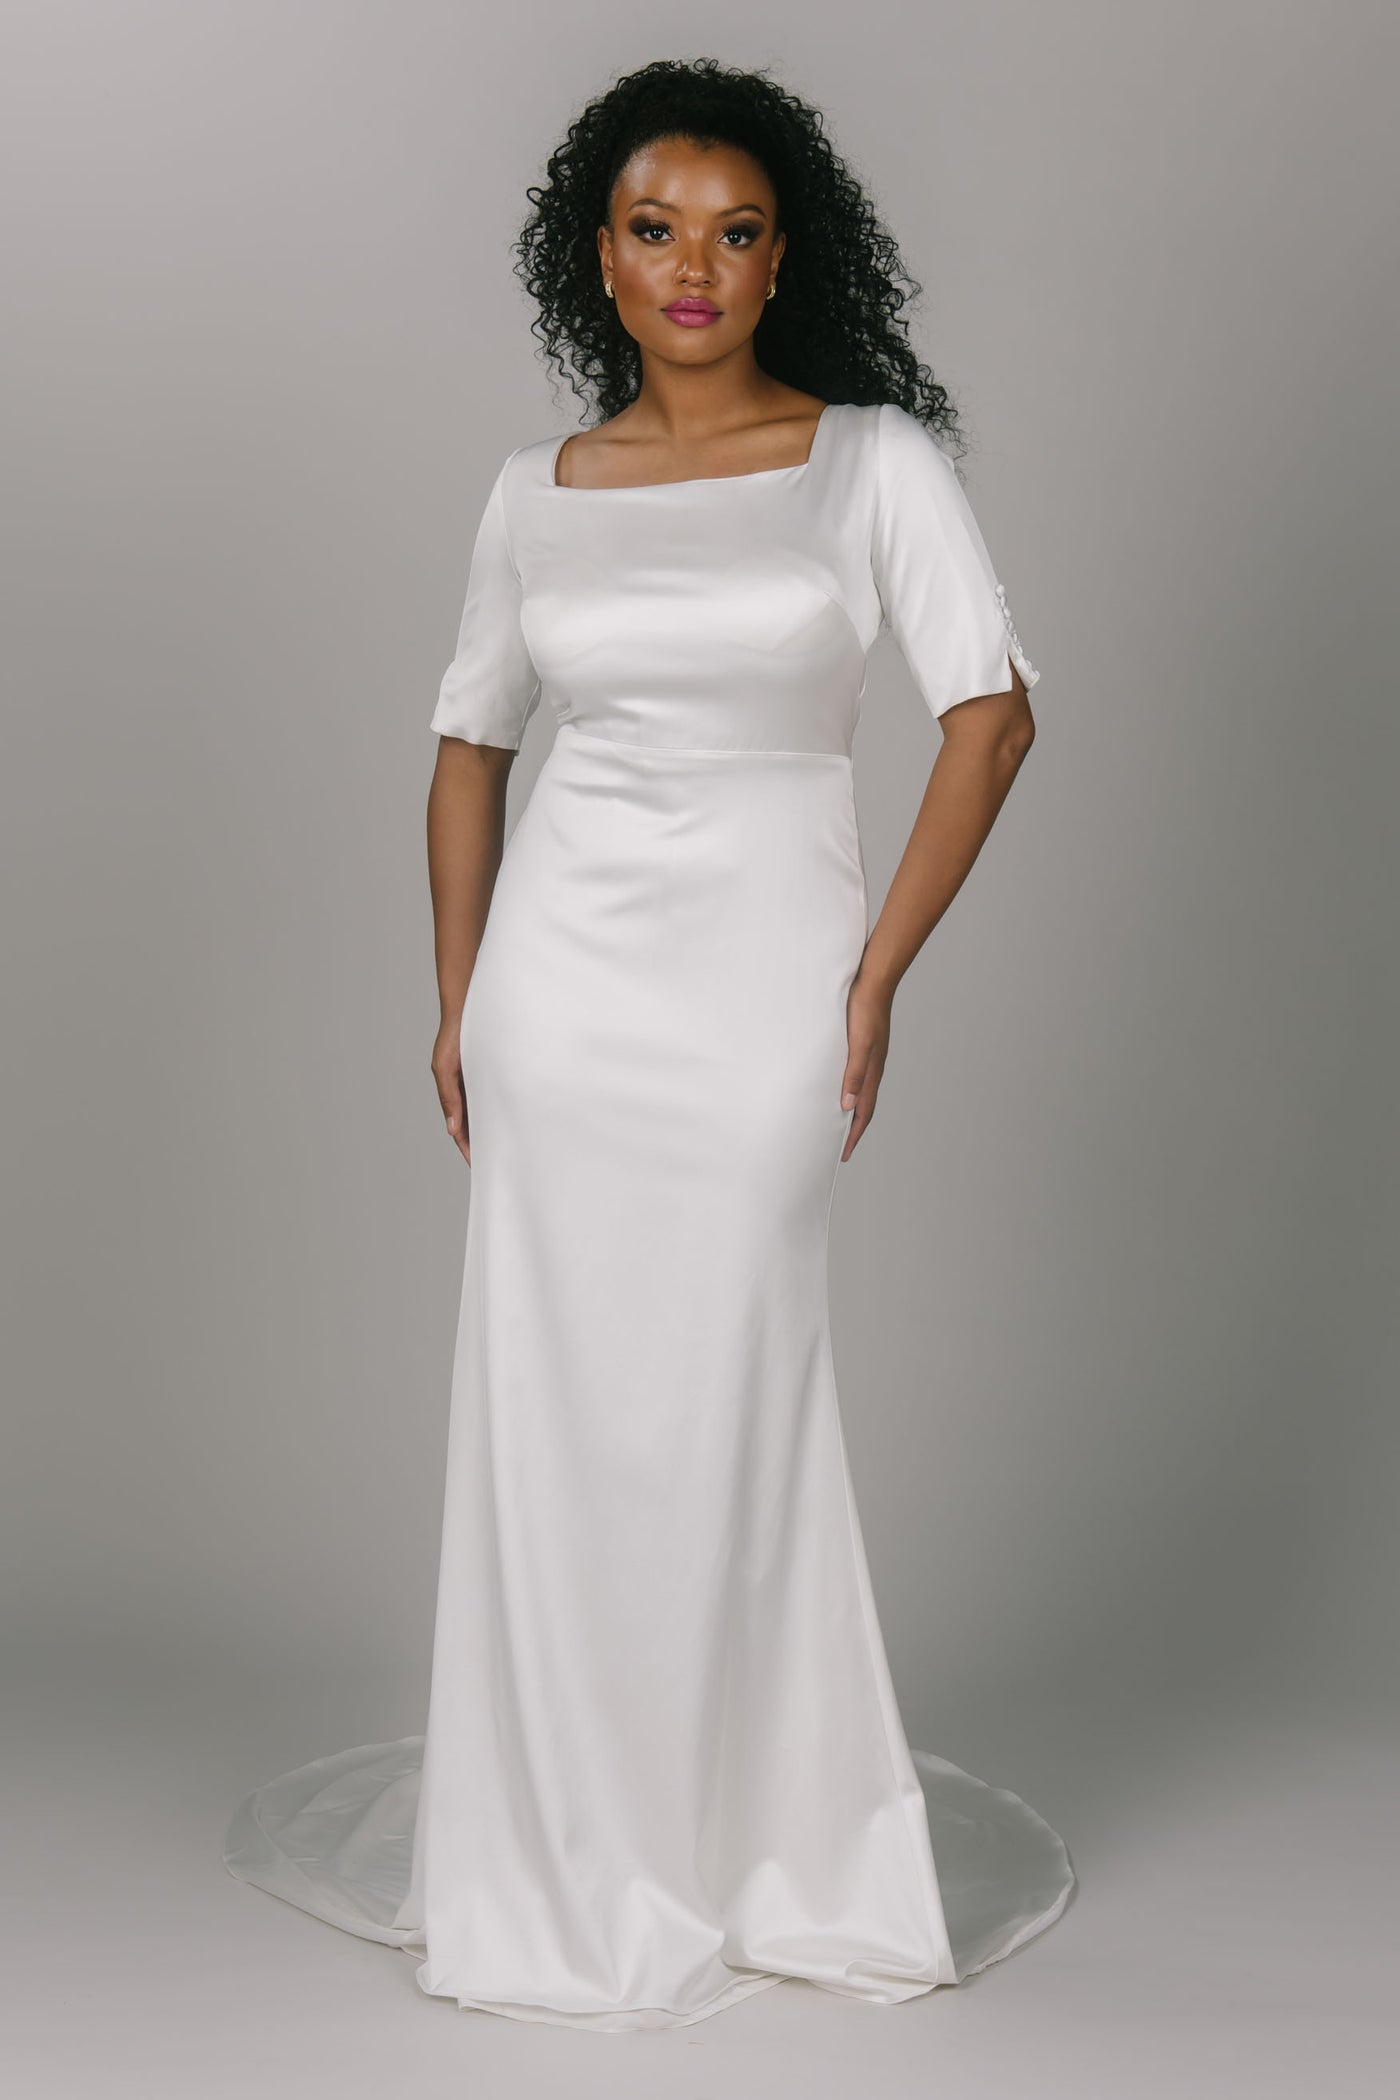 Modern and modest wedding dress. This dress is completely satin with covered buttons on the sleeves and all the way down the back of the dress. It has a square neckline and three quarter length sleeves. It is a looser fitted dress and absolutely perfect for the modest wedding dress bride.